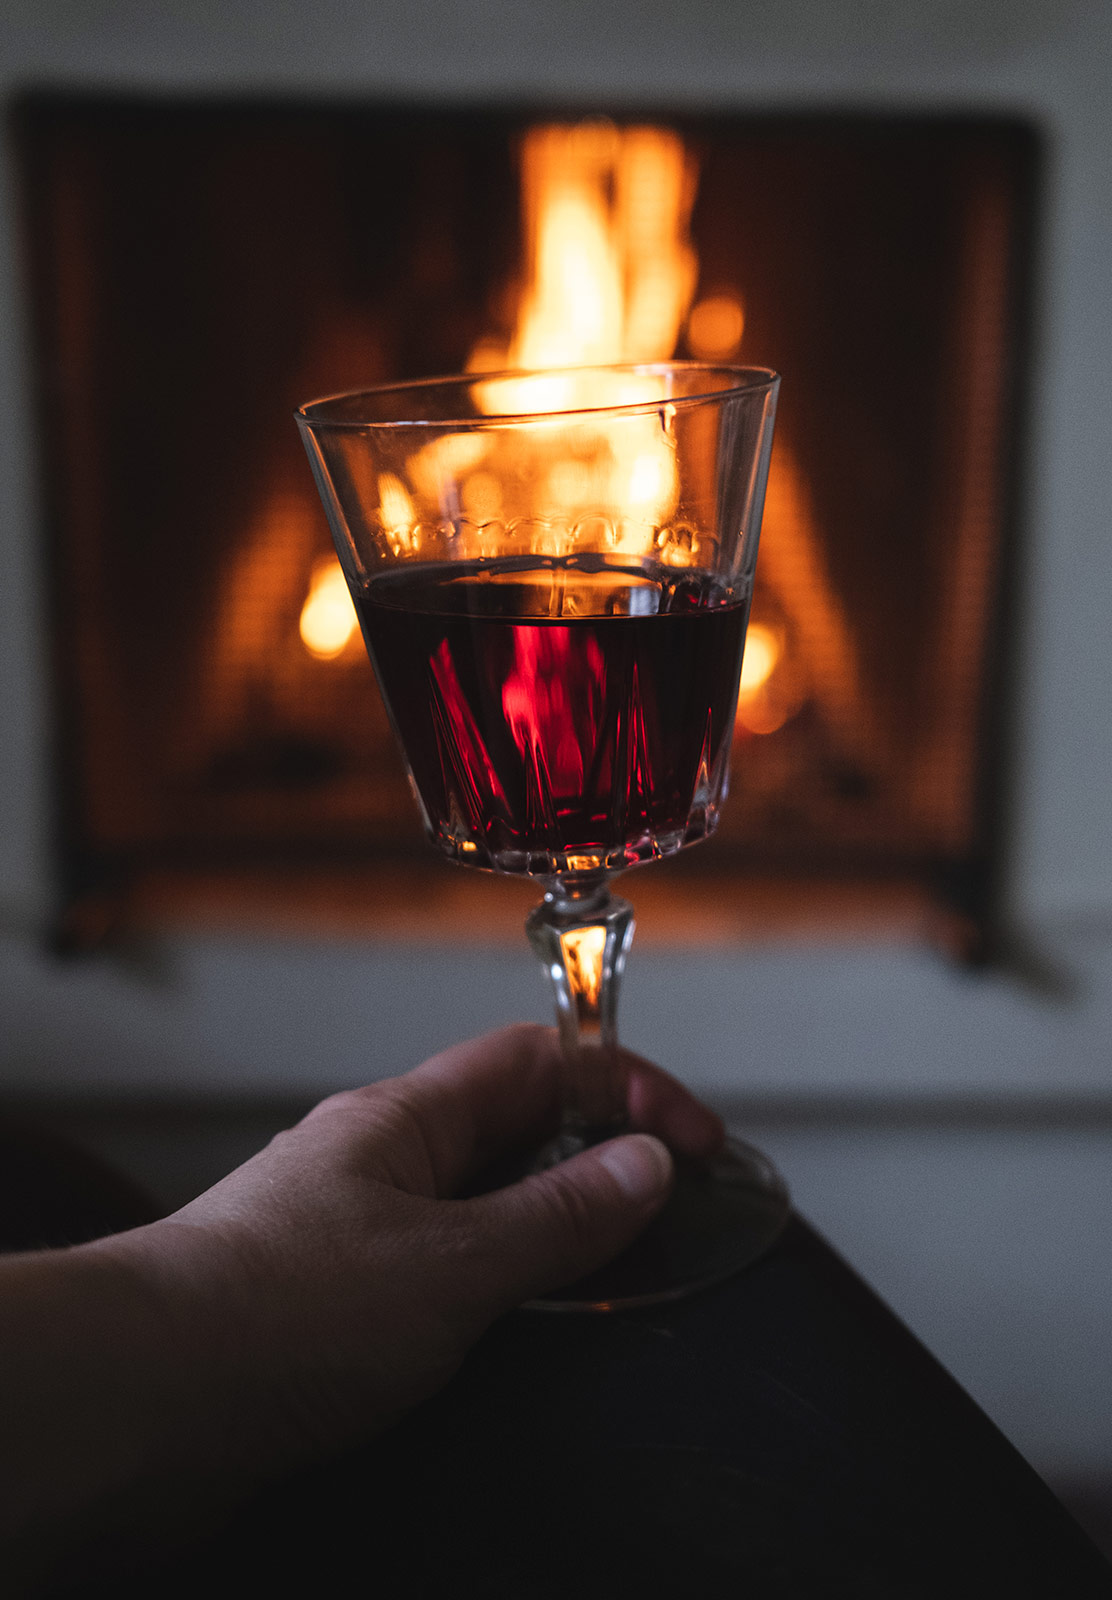 Wine glass in front of fire